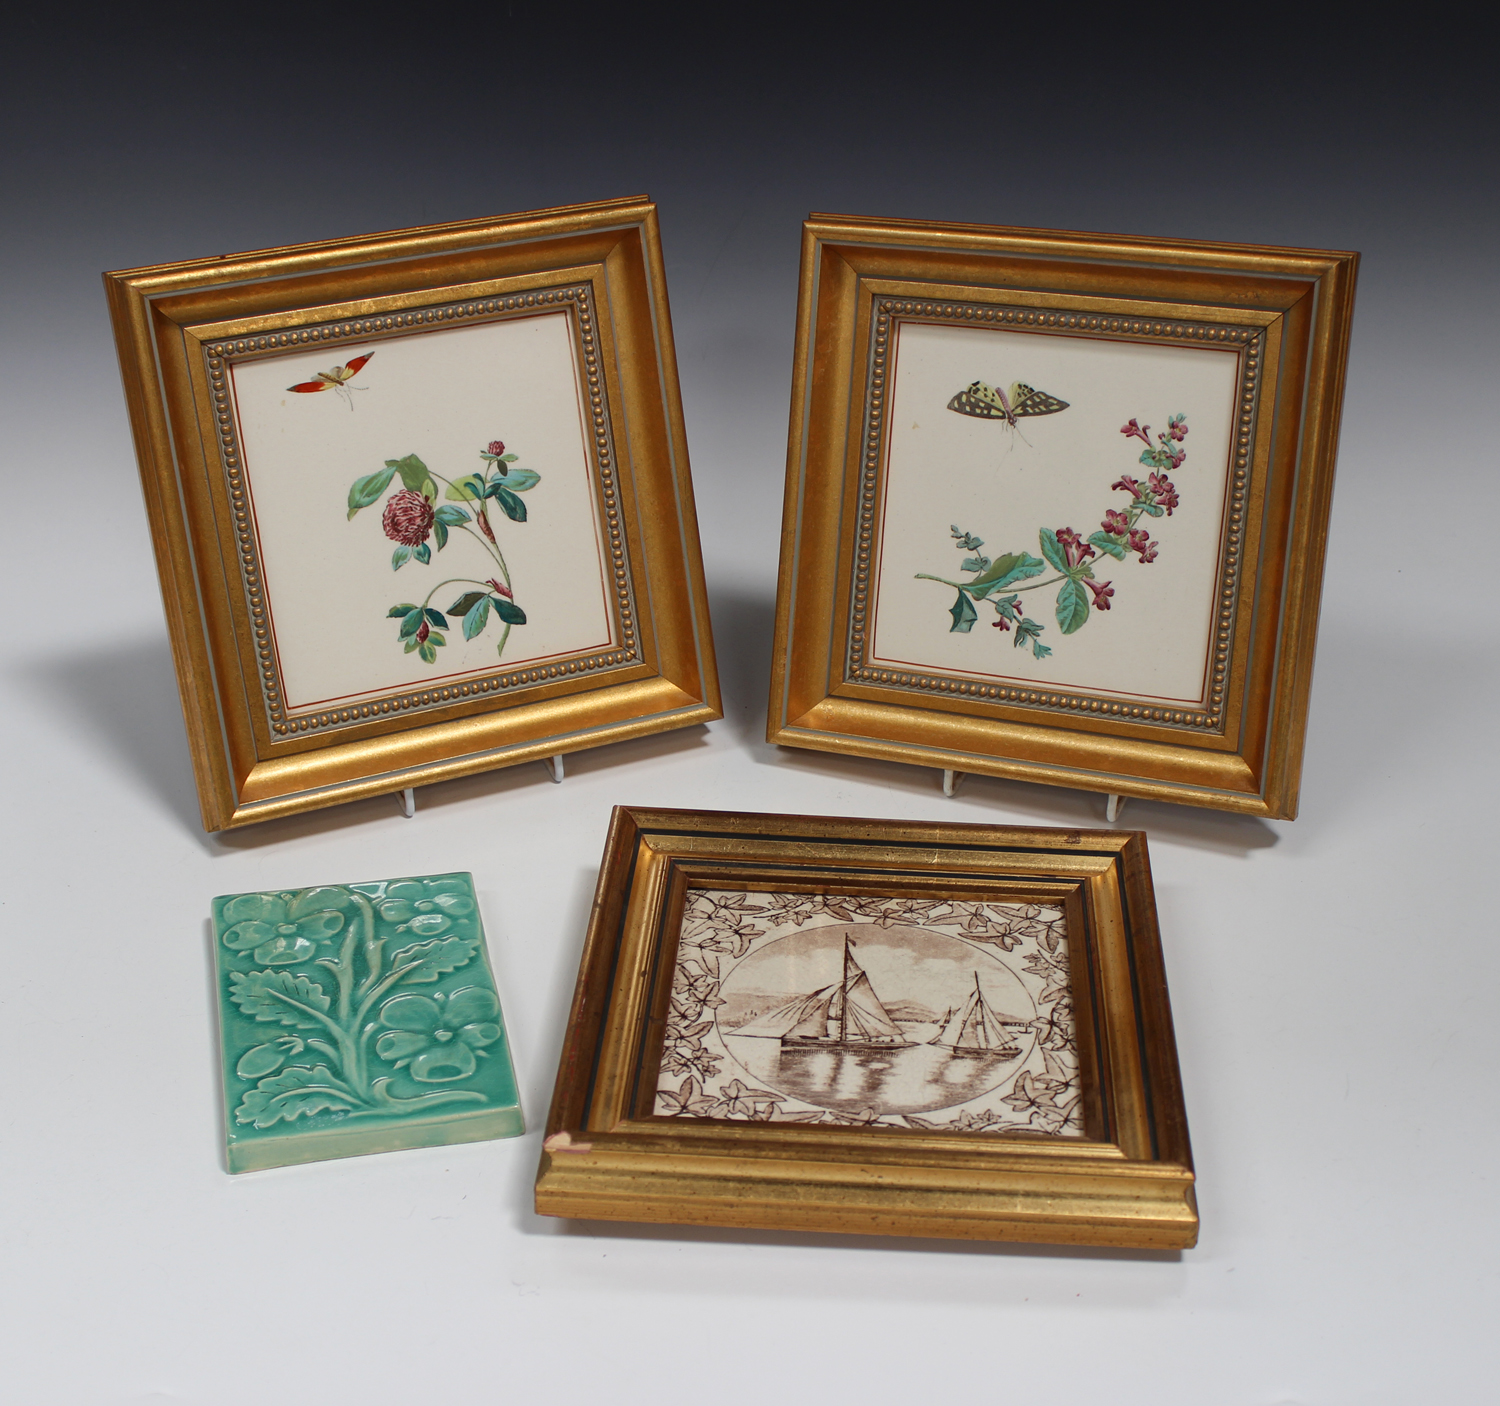 A pair of Mintons pottery rectangular tiles, late 19th century, each painted with a floral study, - Image 2 of 2